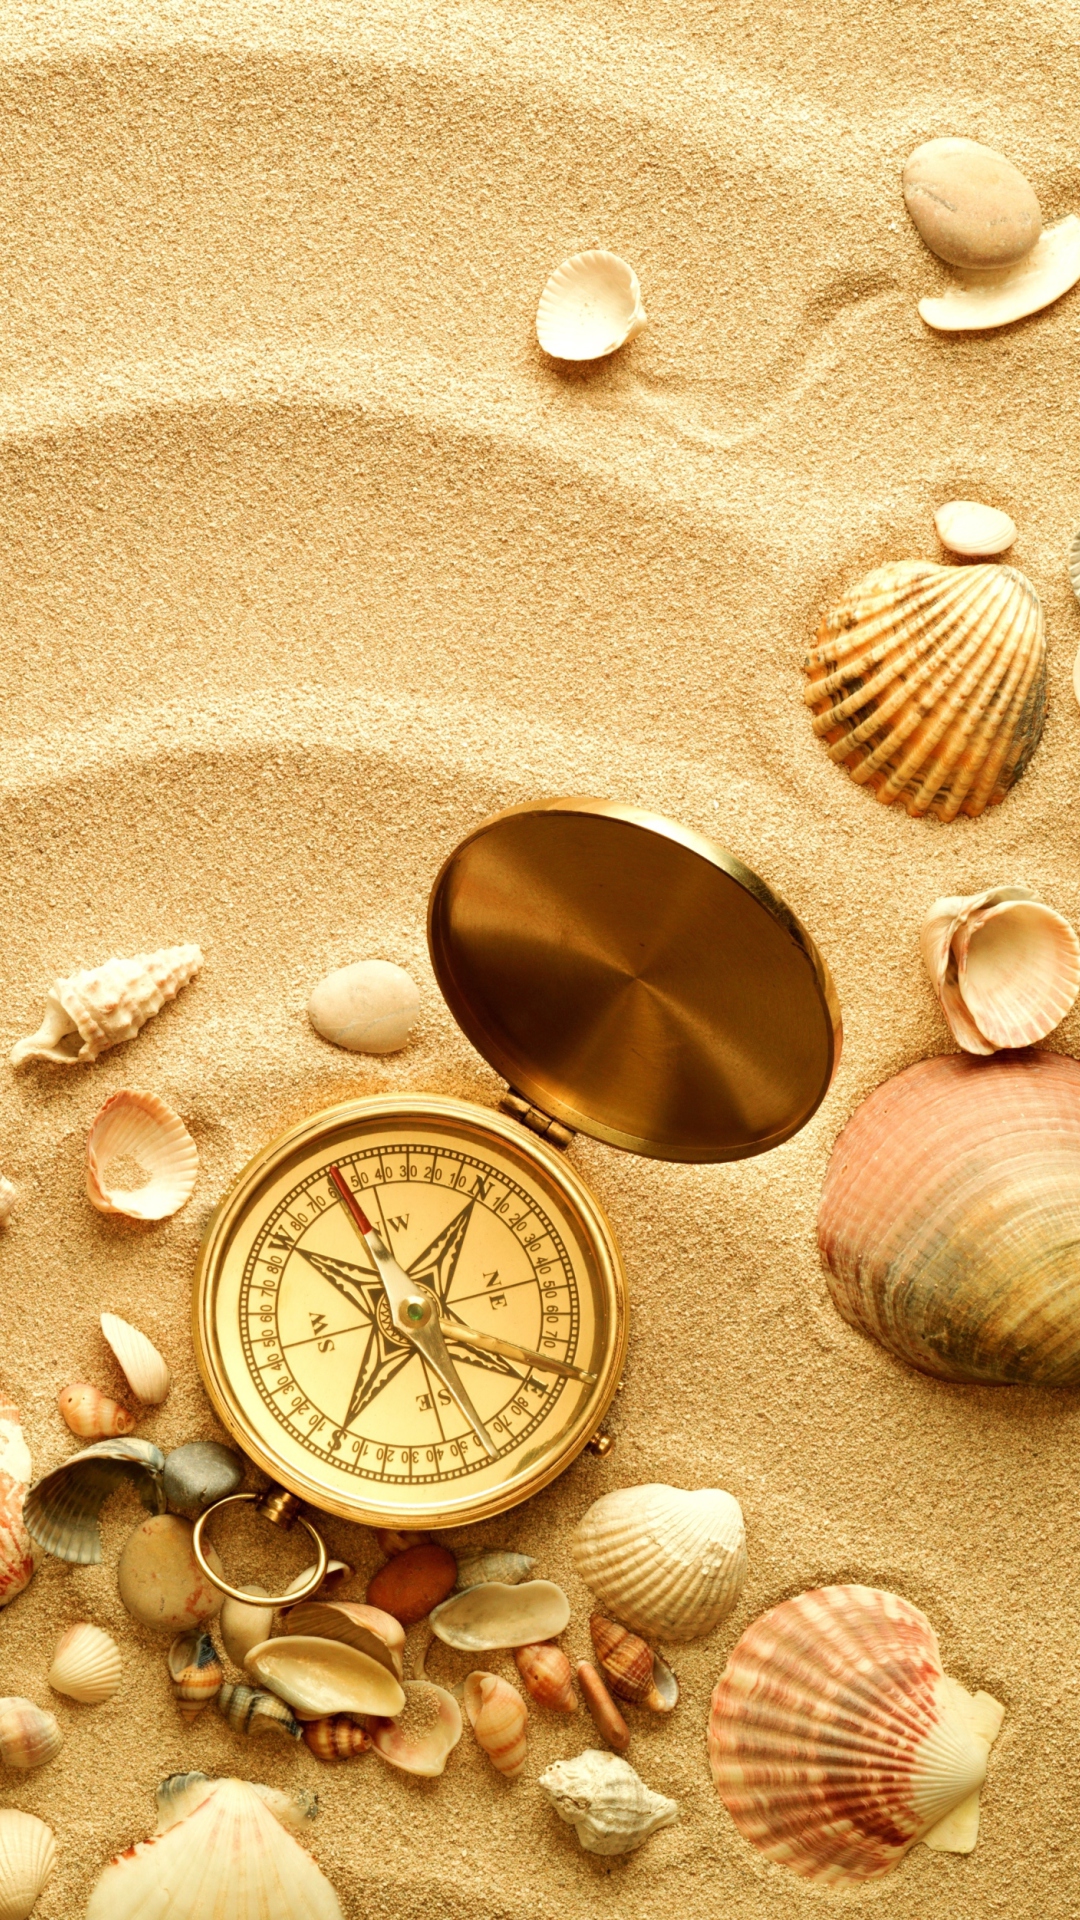 Compass And Shells On Sand wallpaper 1080x1920